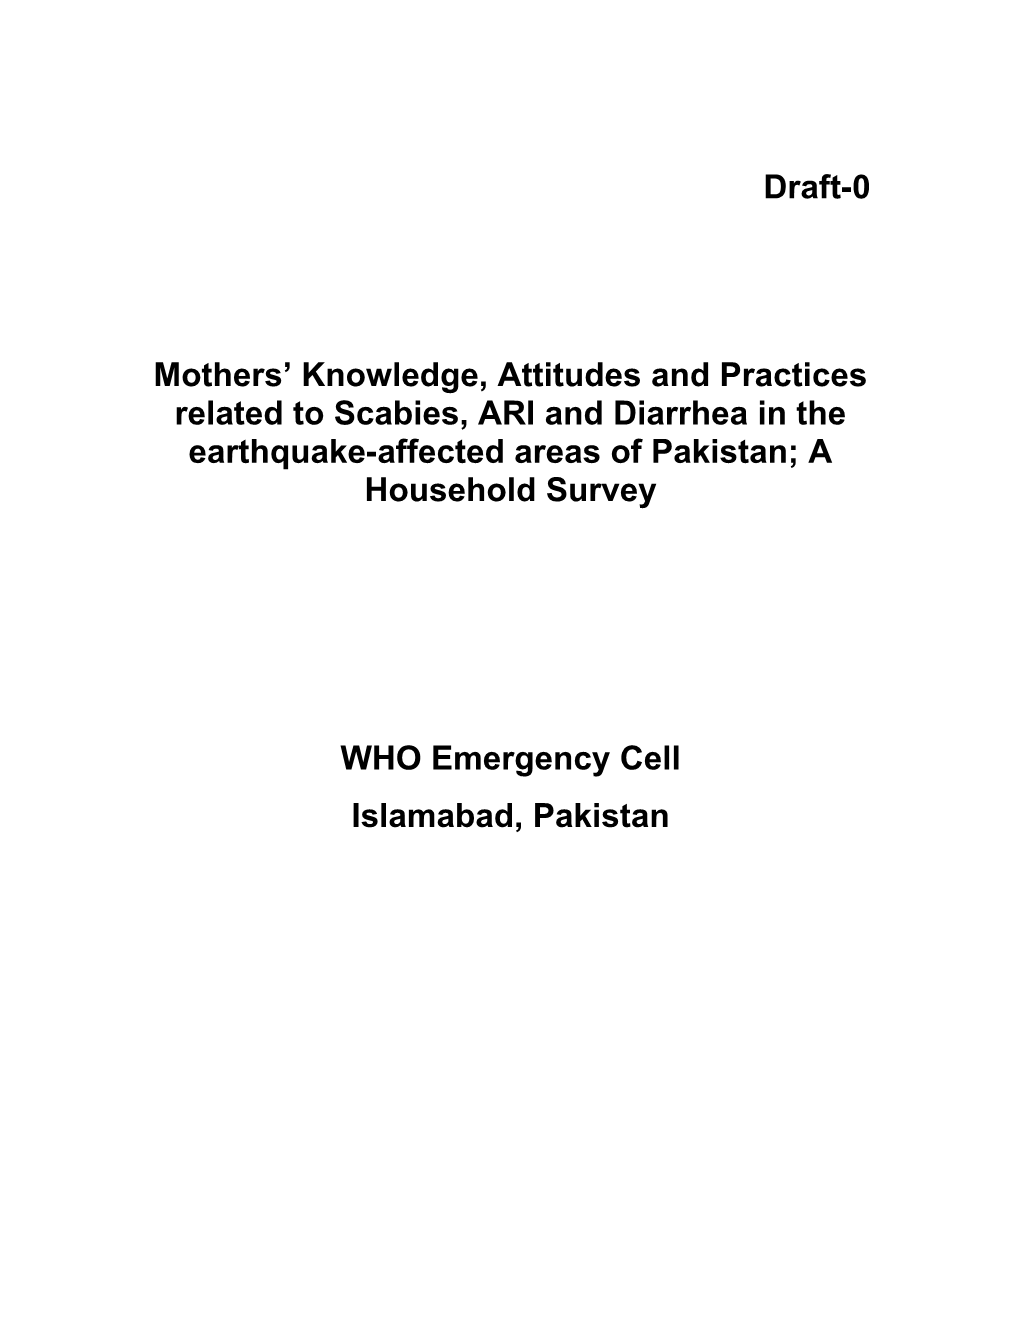 Mothers Knowledge, Attitudes and Practices Related to Scabies, ARI and Diarrhea in The